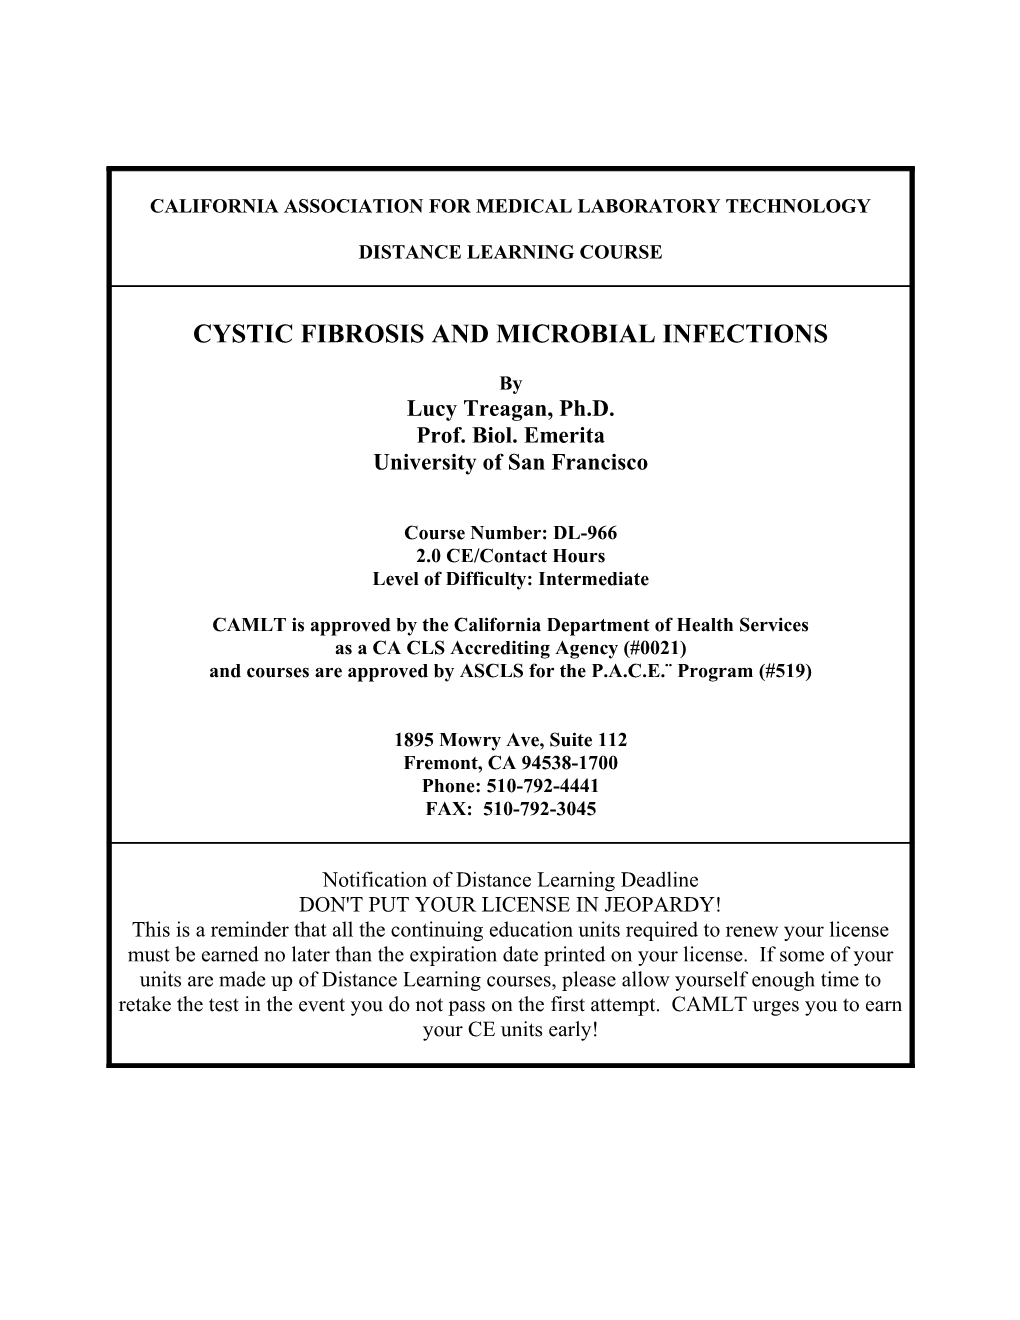 Cystic Fibrosis and Microbial Infections